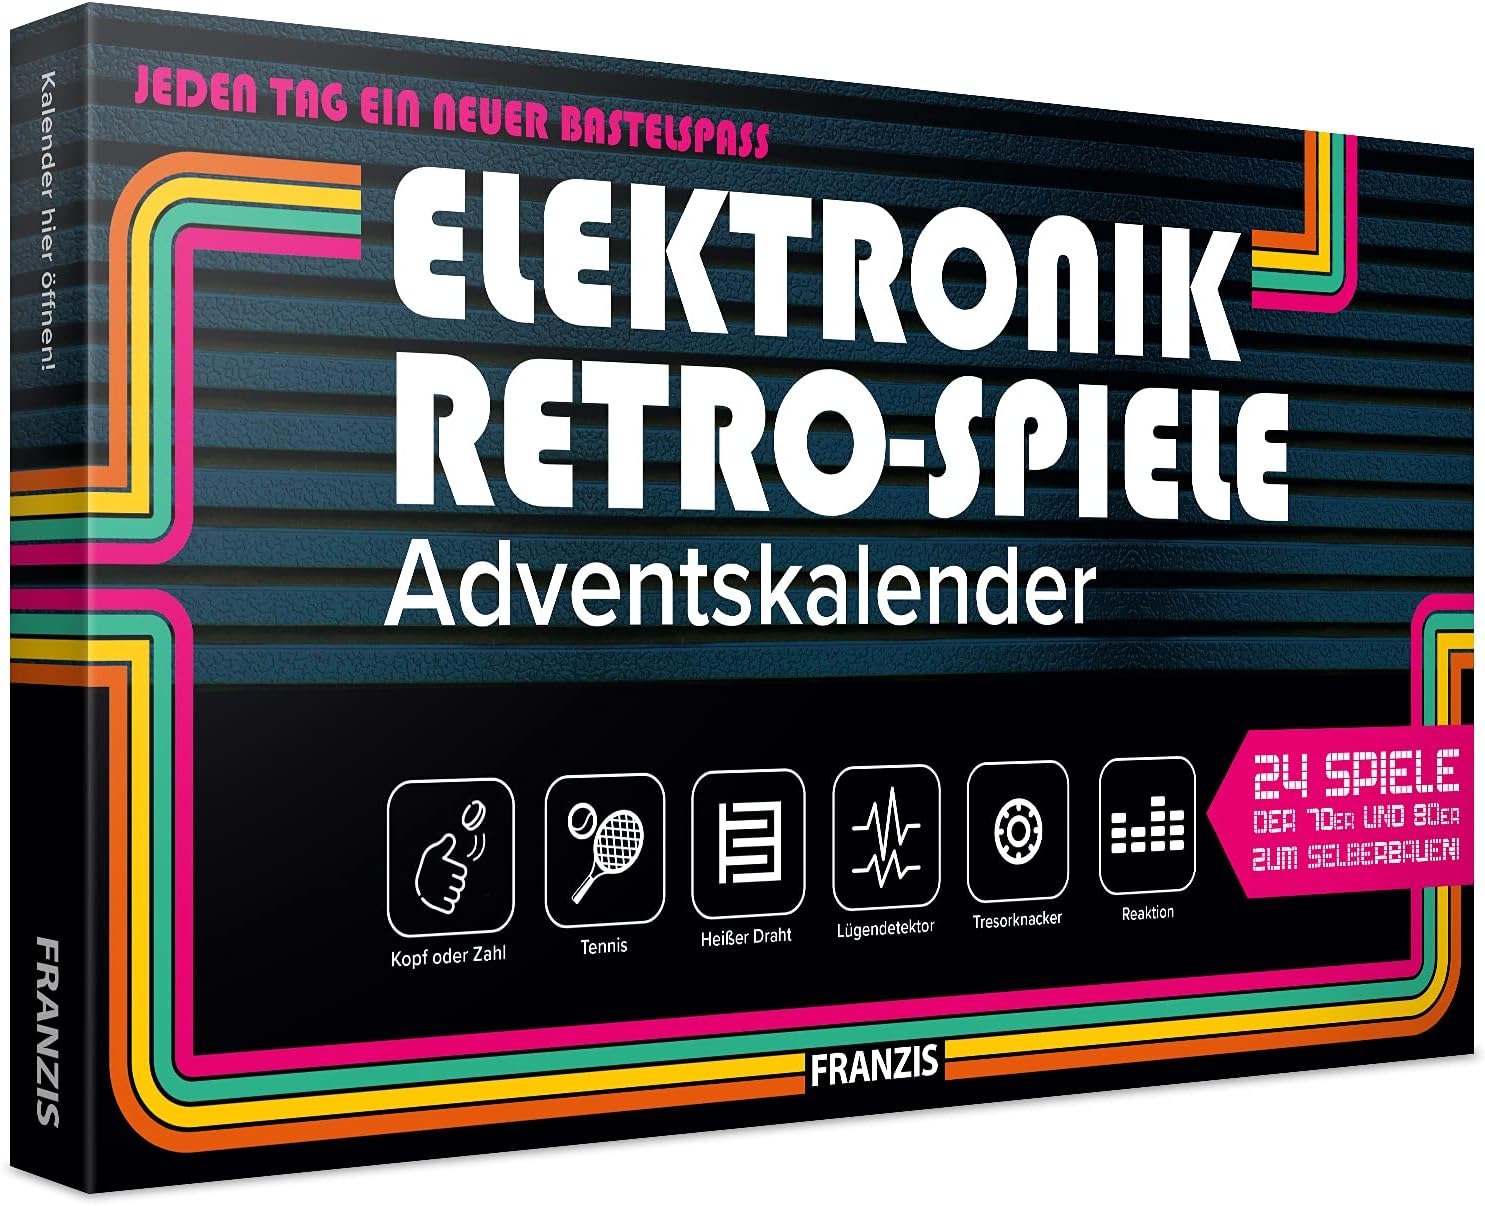 Franzis 67150 - Electronic Retro Games Advent Calendar 2020, 24 Games of the 70s and 80s to Build Yourself Without Soldering, A New Craft Fun Every Day, Recommended from 14 Years.